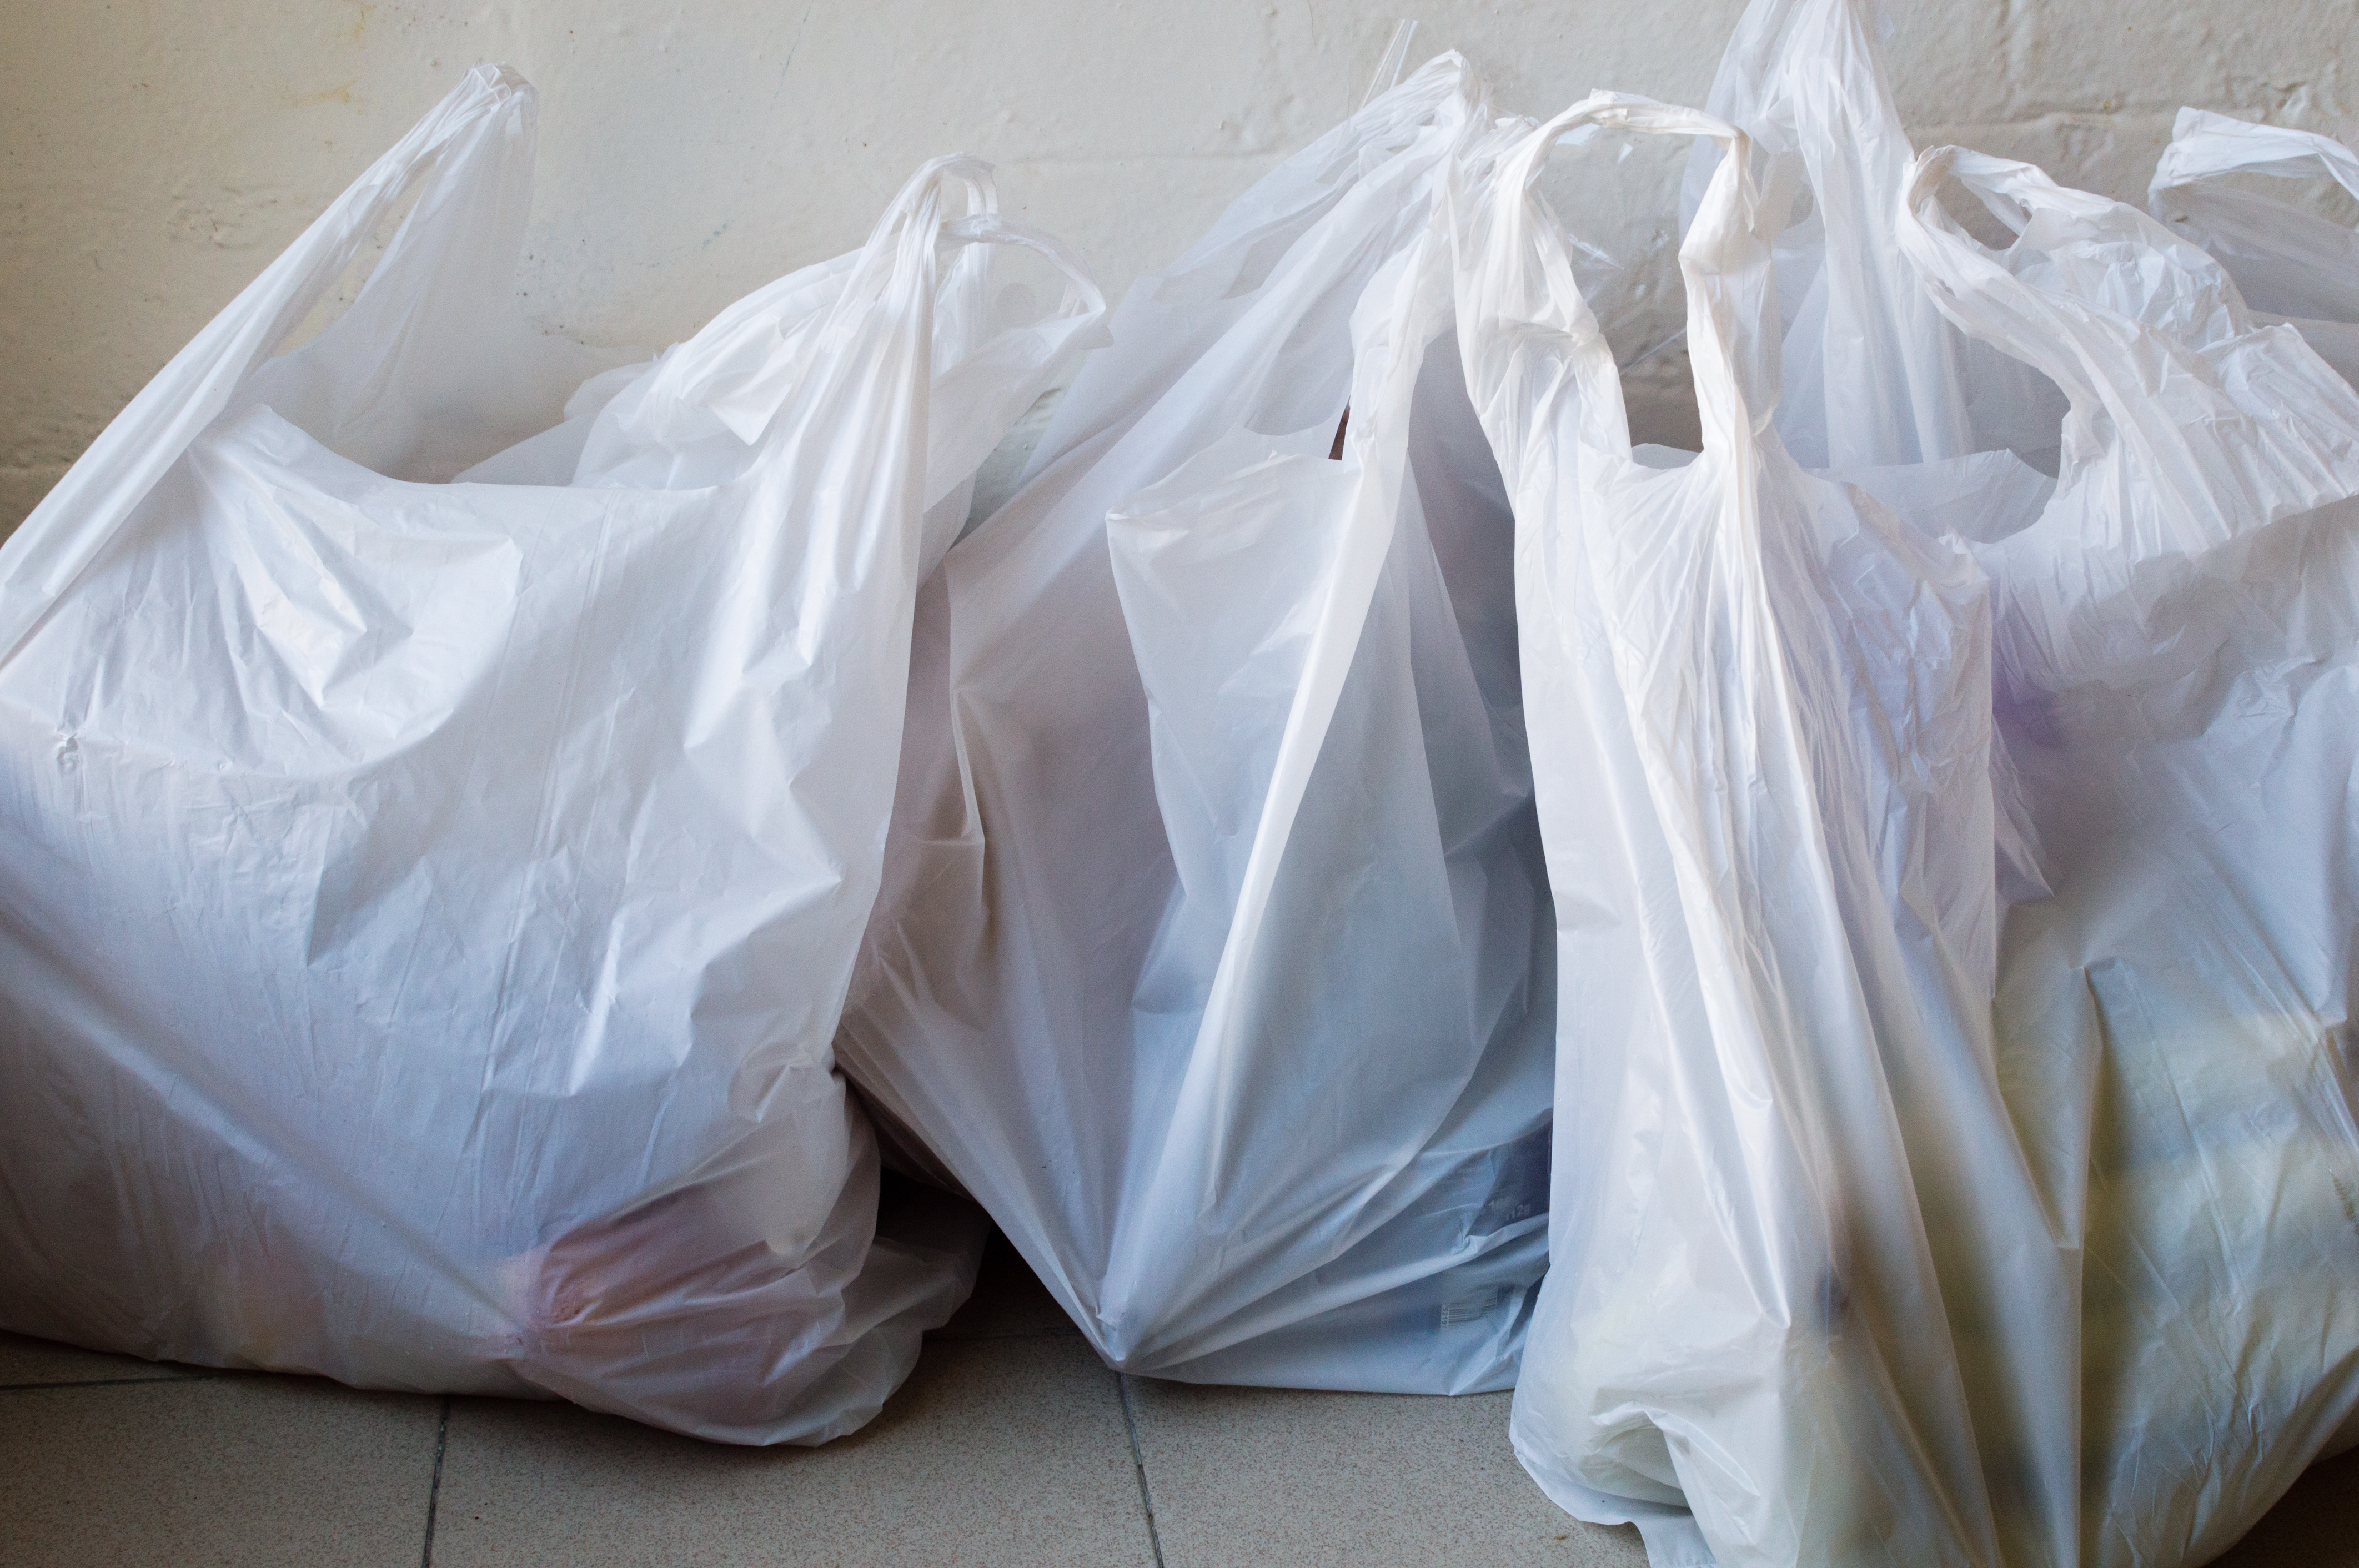 Fort Collins Banning SingleUse Plastic Bags At Large